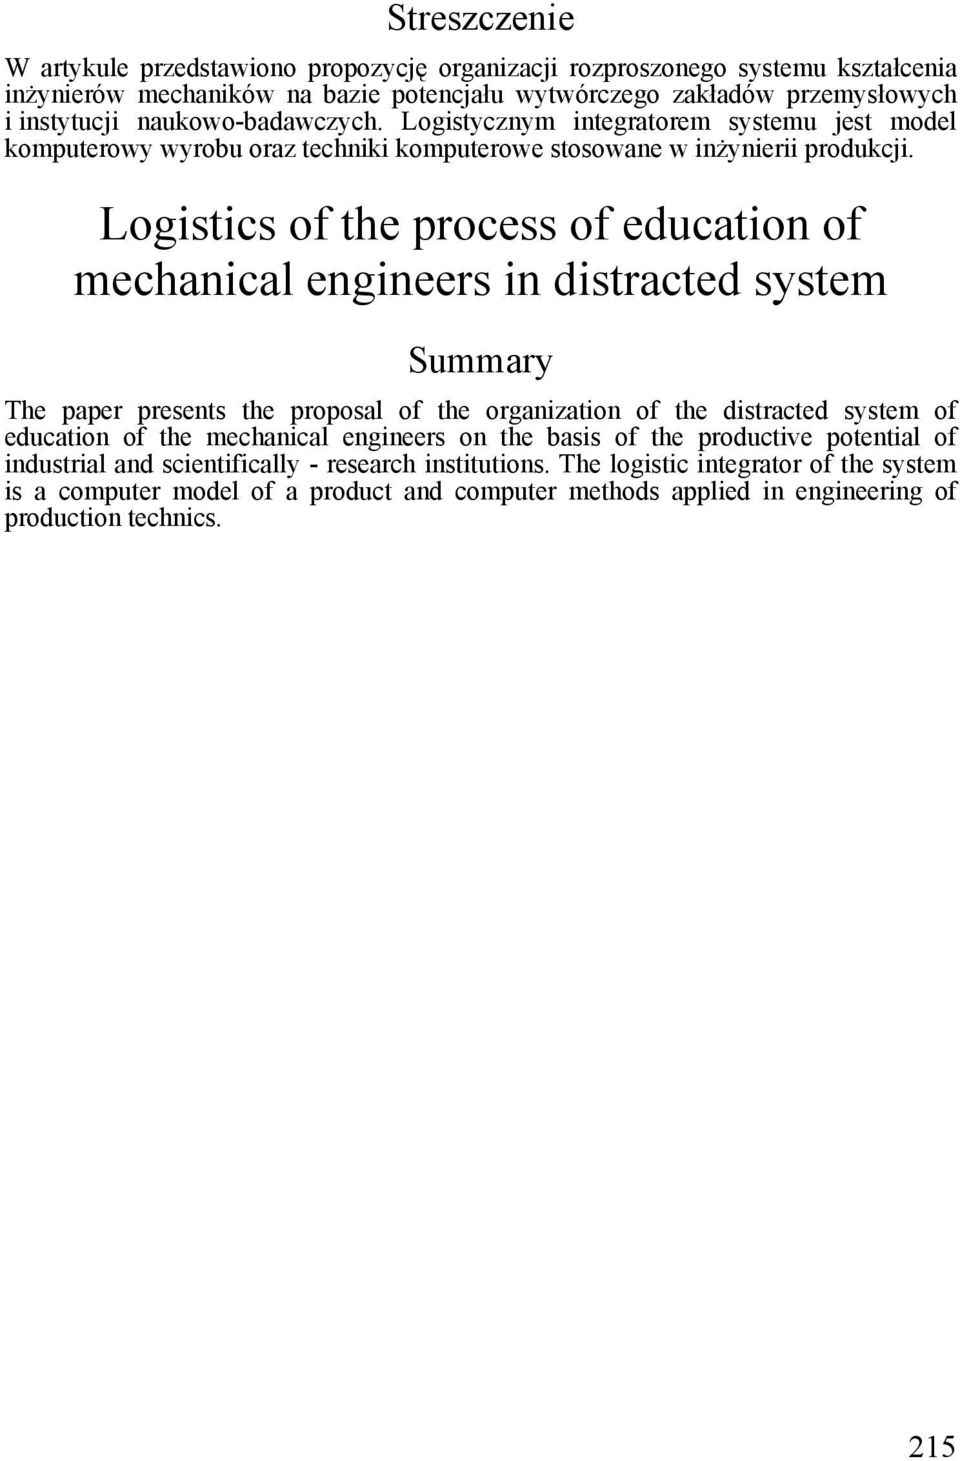 Logistics of the process of education of mechanical engineers in distracted system Summary The paper presents the proposal of the organization of the distracted system of education of the